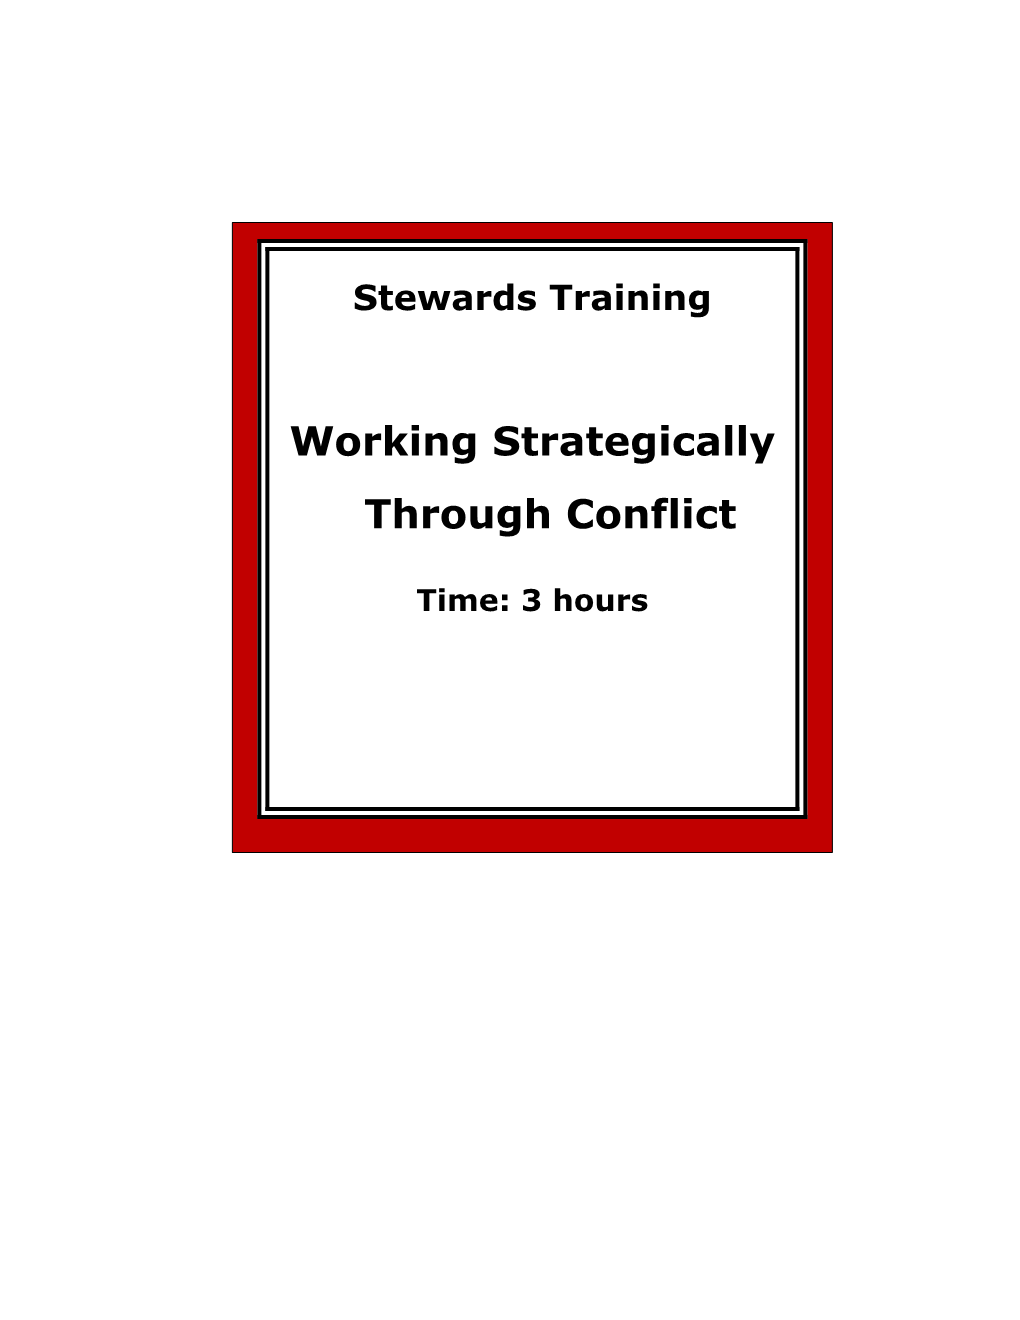 Working Through Conflict Making the Most of a Difficult Situation